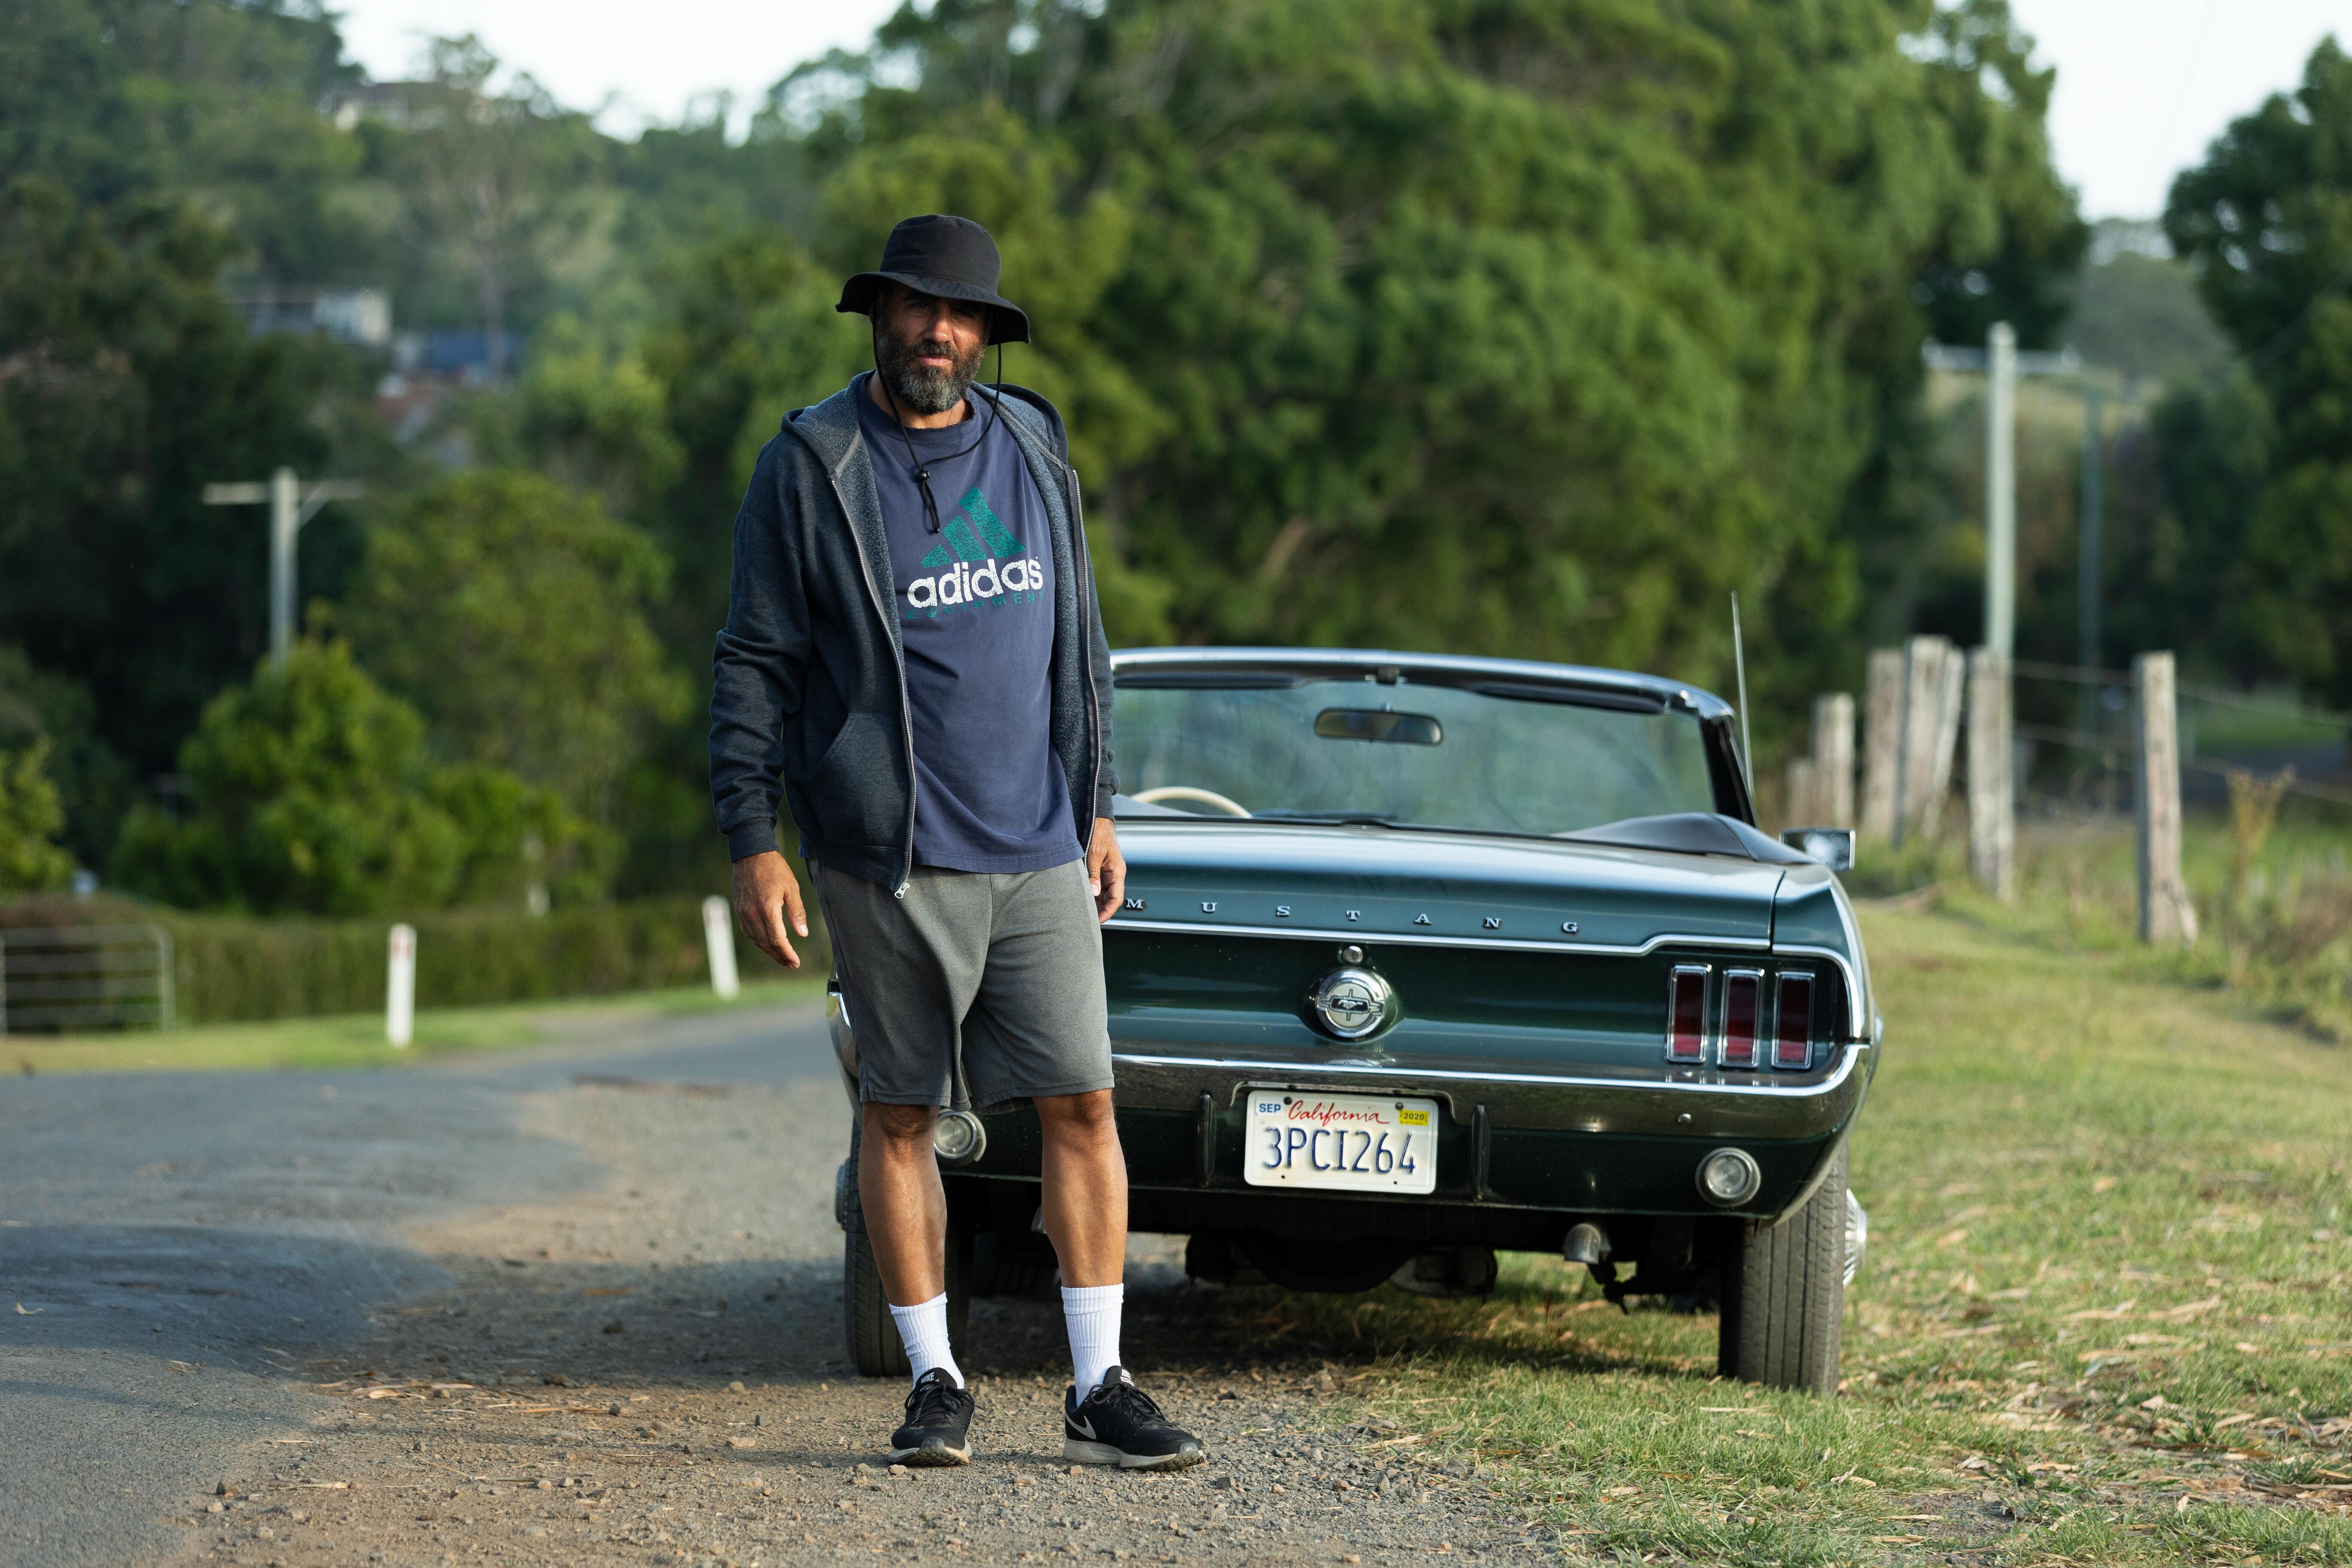 Tony Hogburn stands outside his car wearing an Adidas t-shirt and wide-brimmed hat.